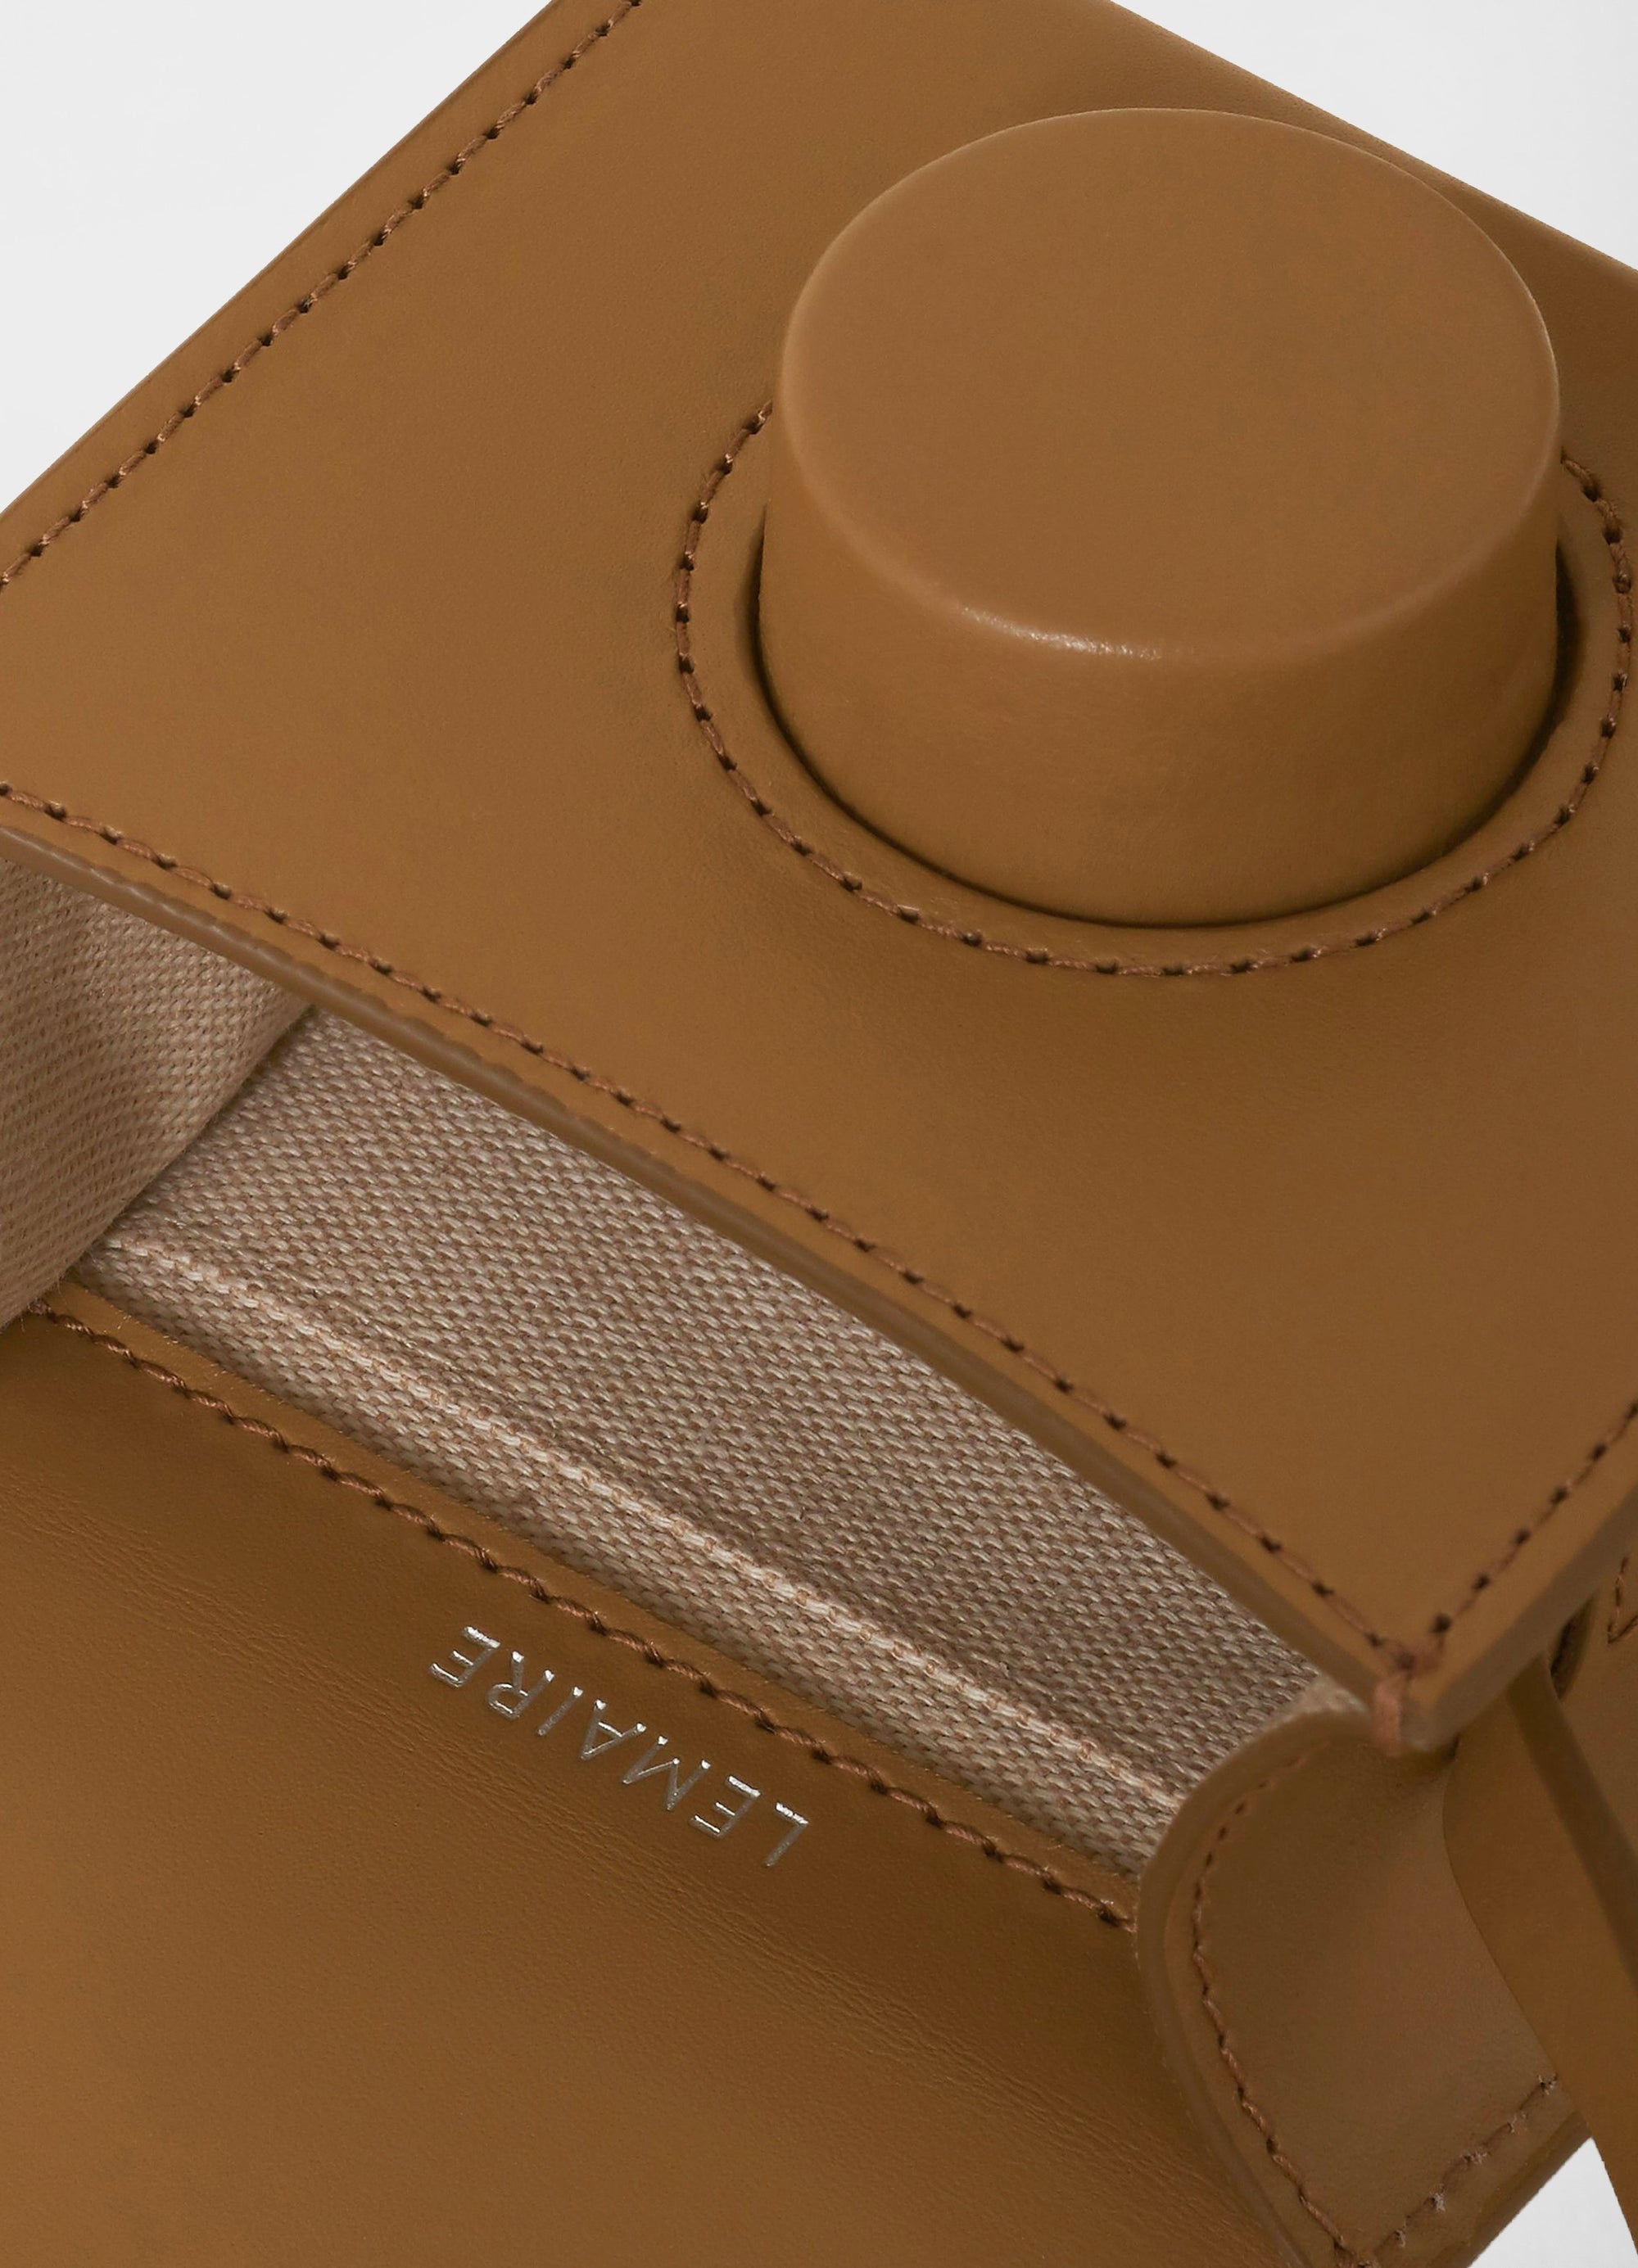 MINI CAMERA BAG / ONLINE EXCLUSIVE
VEGETABLE-TANNED LEATHER - 4